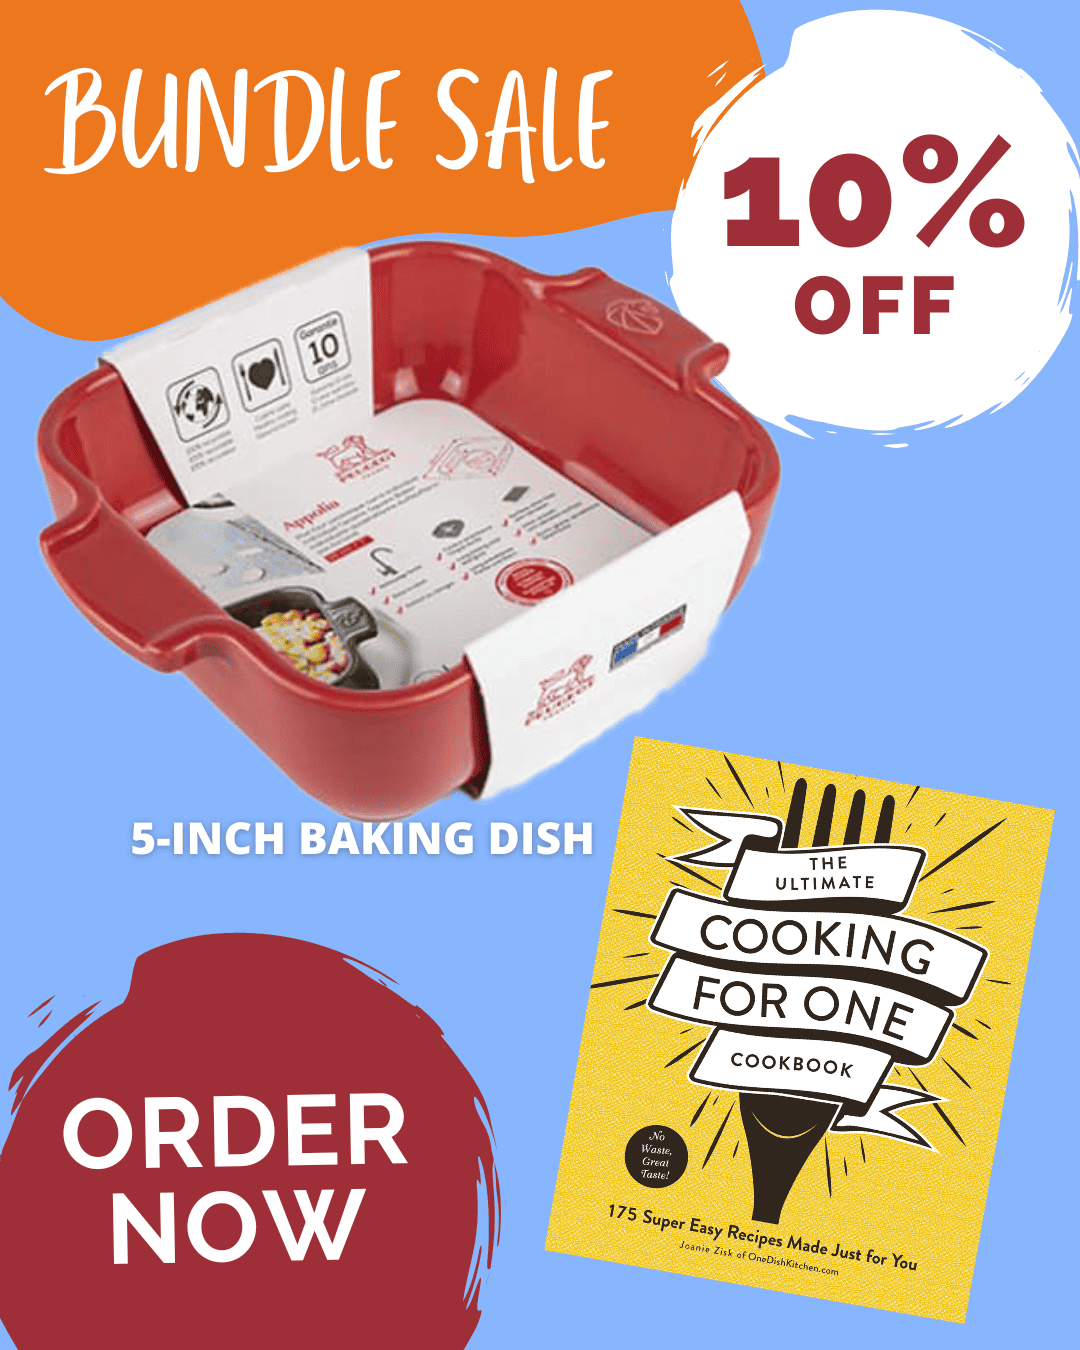 10% off when you purchase the cookbook and 5-inch baking dish together